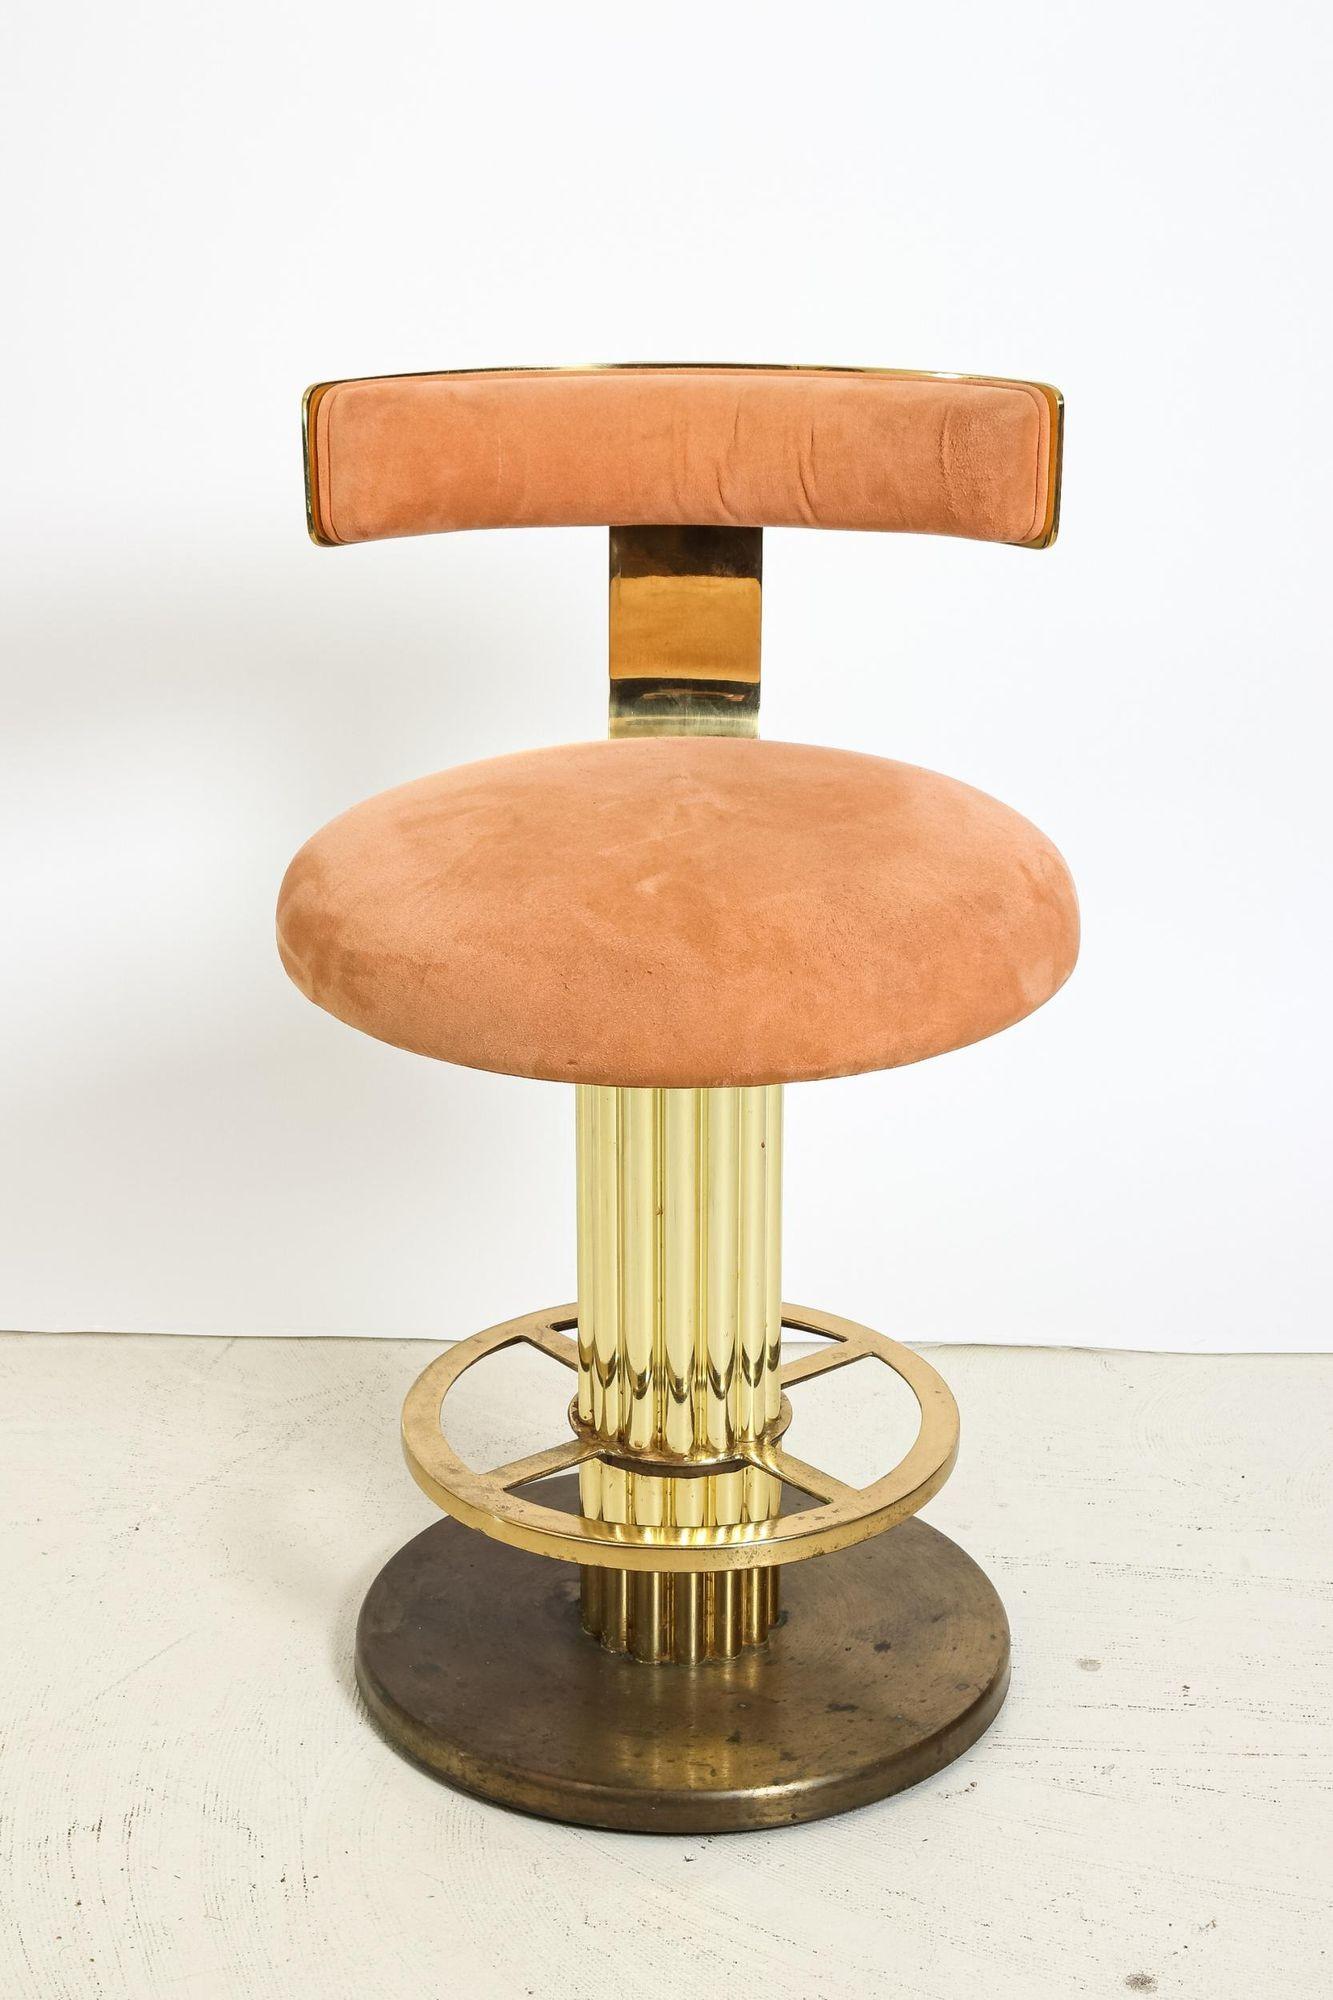 Glamorous gold and pink suede counter or bar stools manufactured by Design for Leisure in the 1980s. An opulent style with Art Deco influence, these stools feature rounded seats and fluted base with footrest. Stools have an automatic return to a